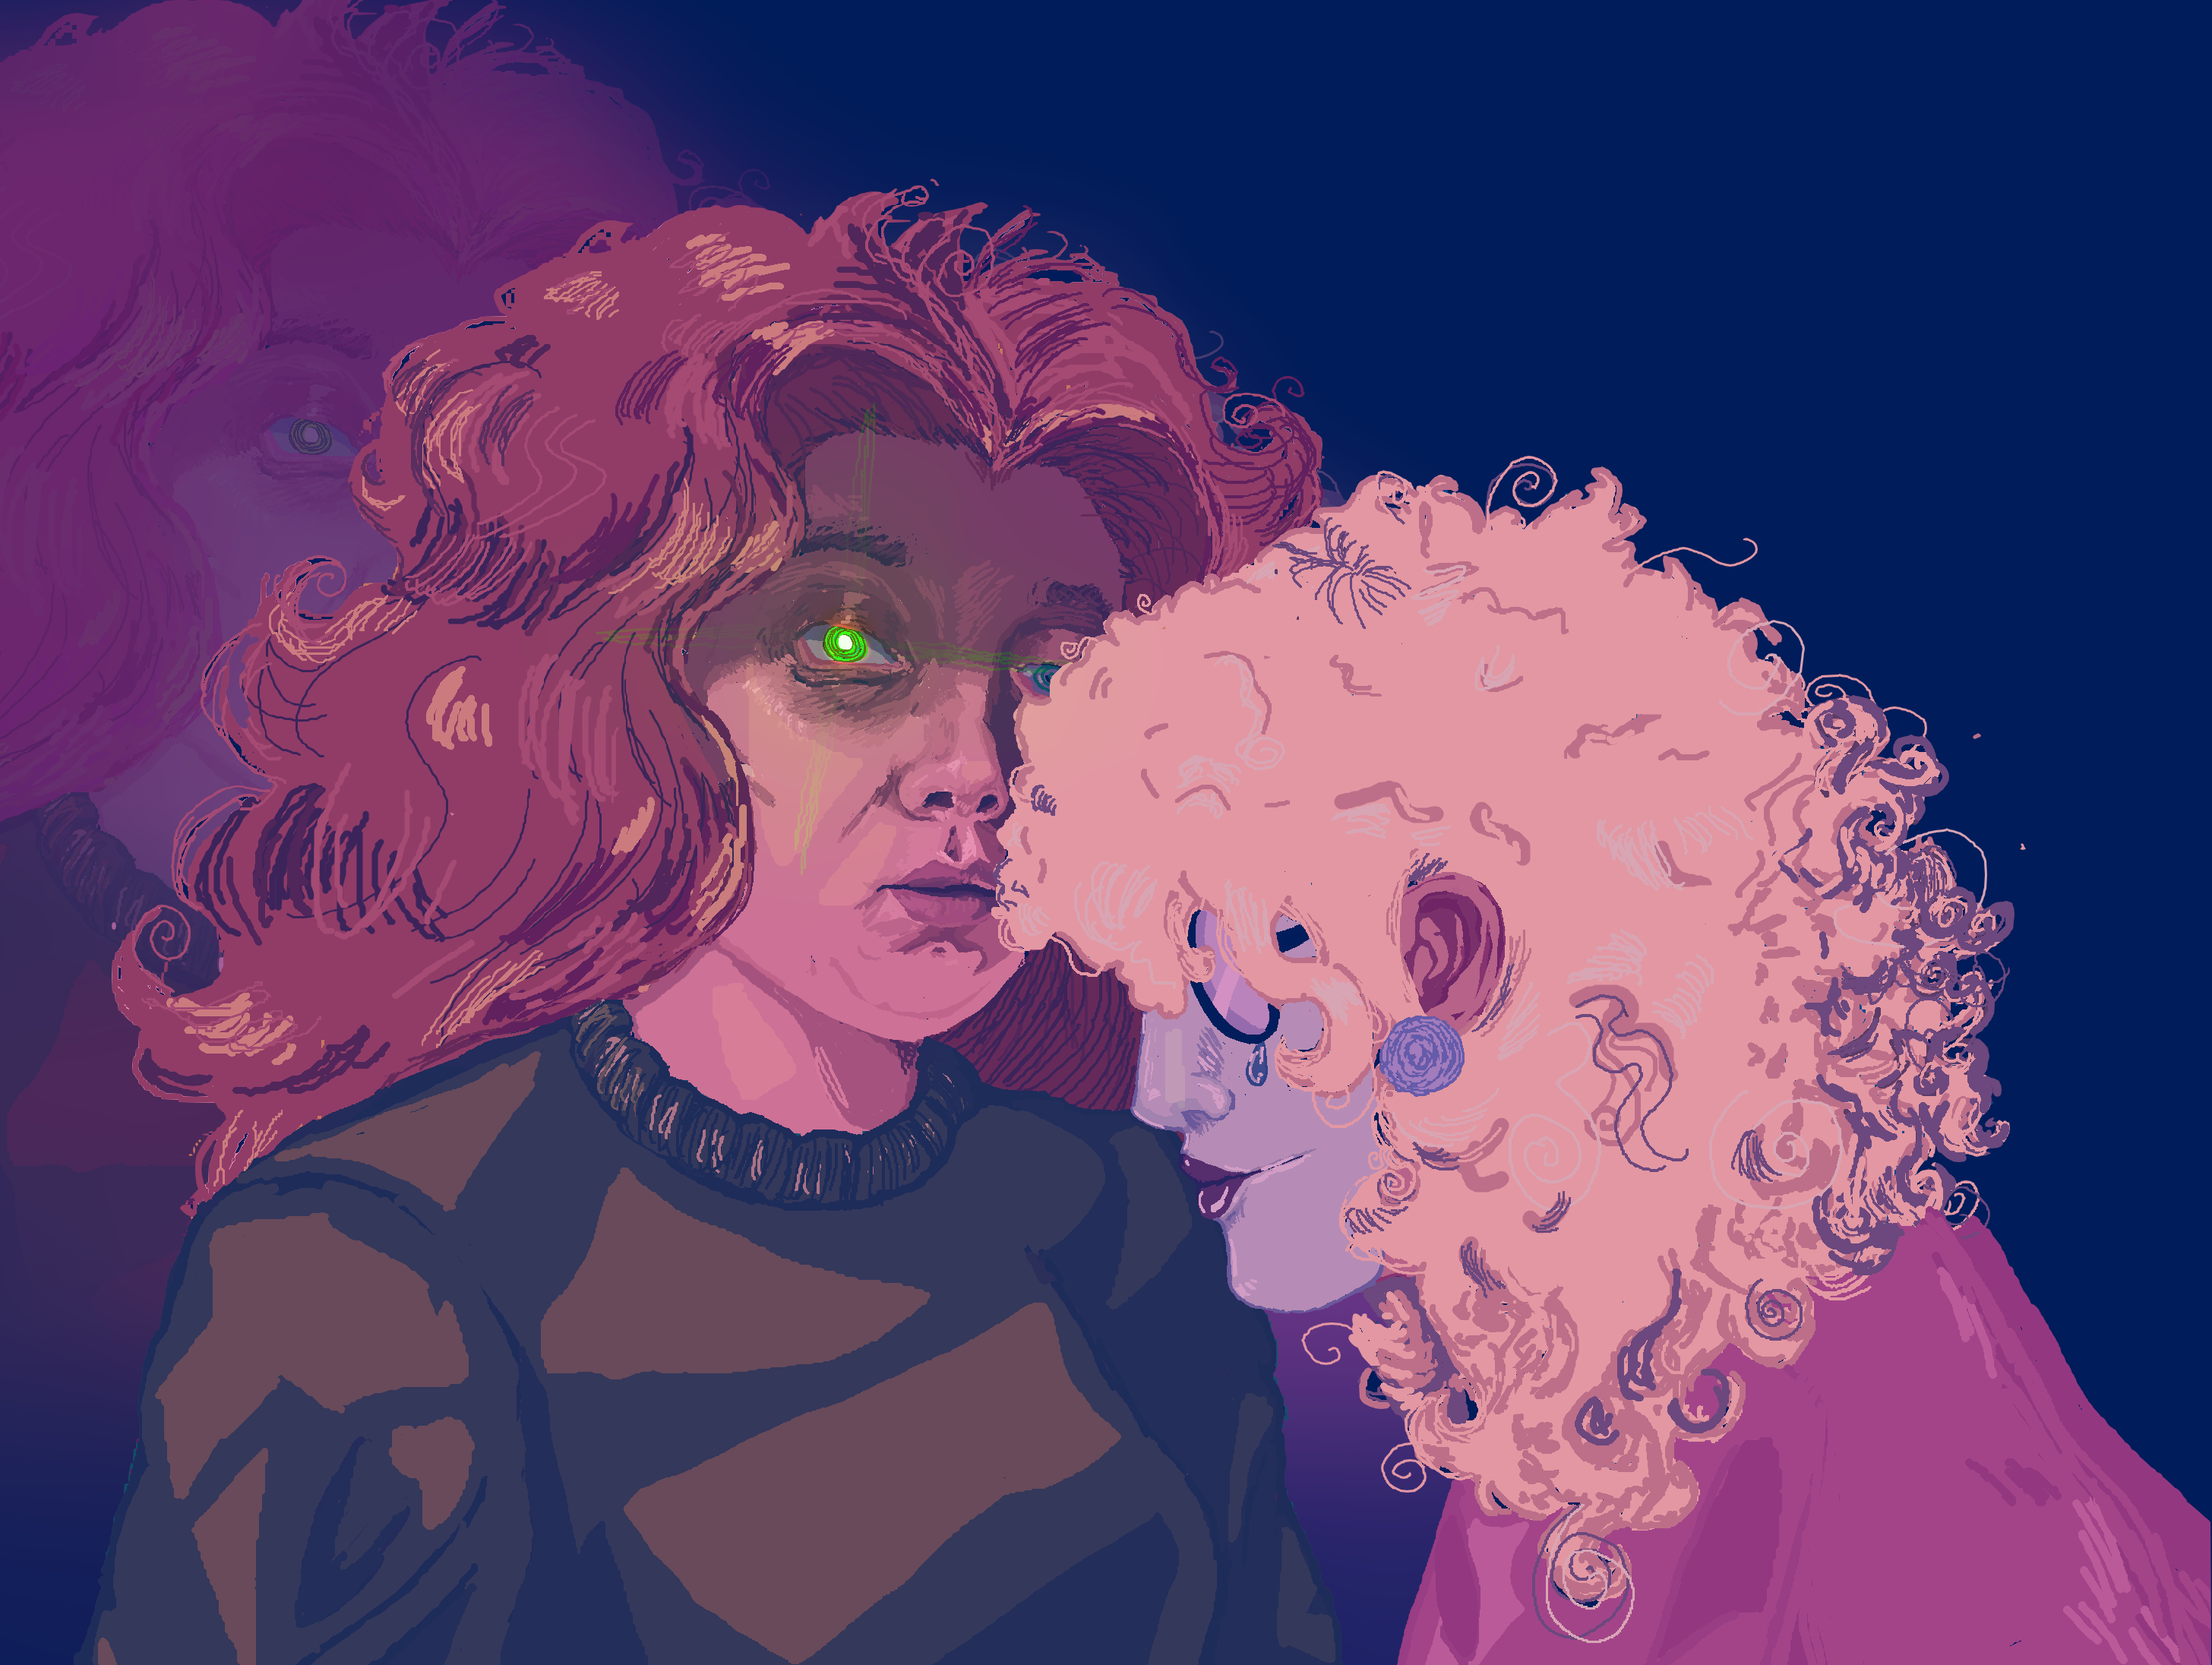 Digital drawing made in MS Paint depicting a red haired woman with green eyes, one glowing eye, who is looking off into the distance. She wears a muted green sweater. Beside her is another woman. This woman has blonde hair, very curly, and has on a clay Pierrot clown mask, which has a sculpted tear on it. The lips of the mask extend too far and make the cheek look cut. Over the mask she has on round, black glasses. She is wearing a pink suit jacket. She is leaning down and pressing a kiss to the red haired woman's shoulder.